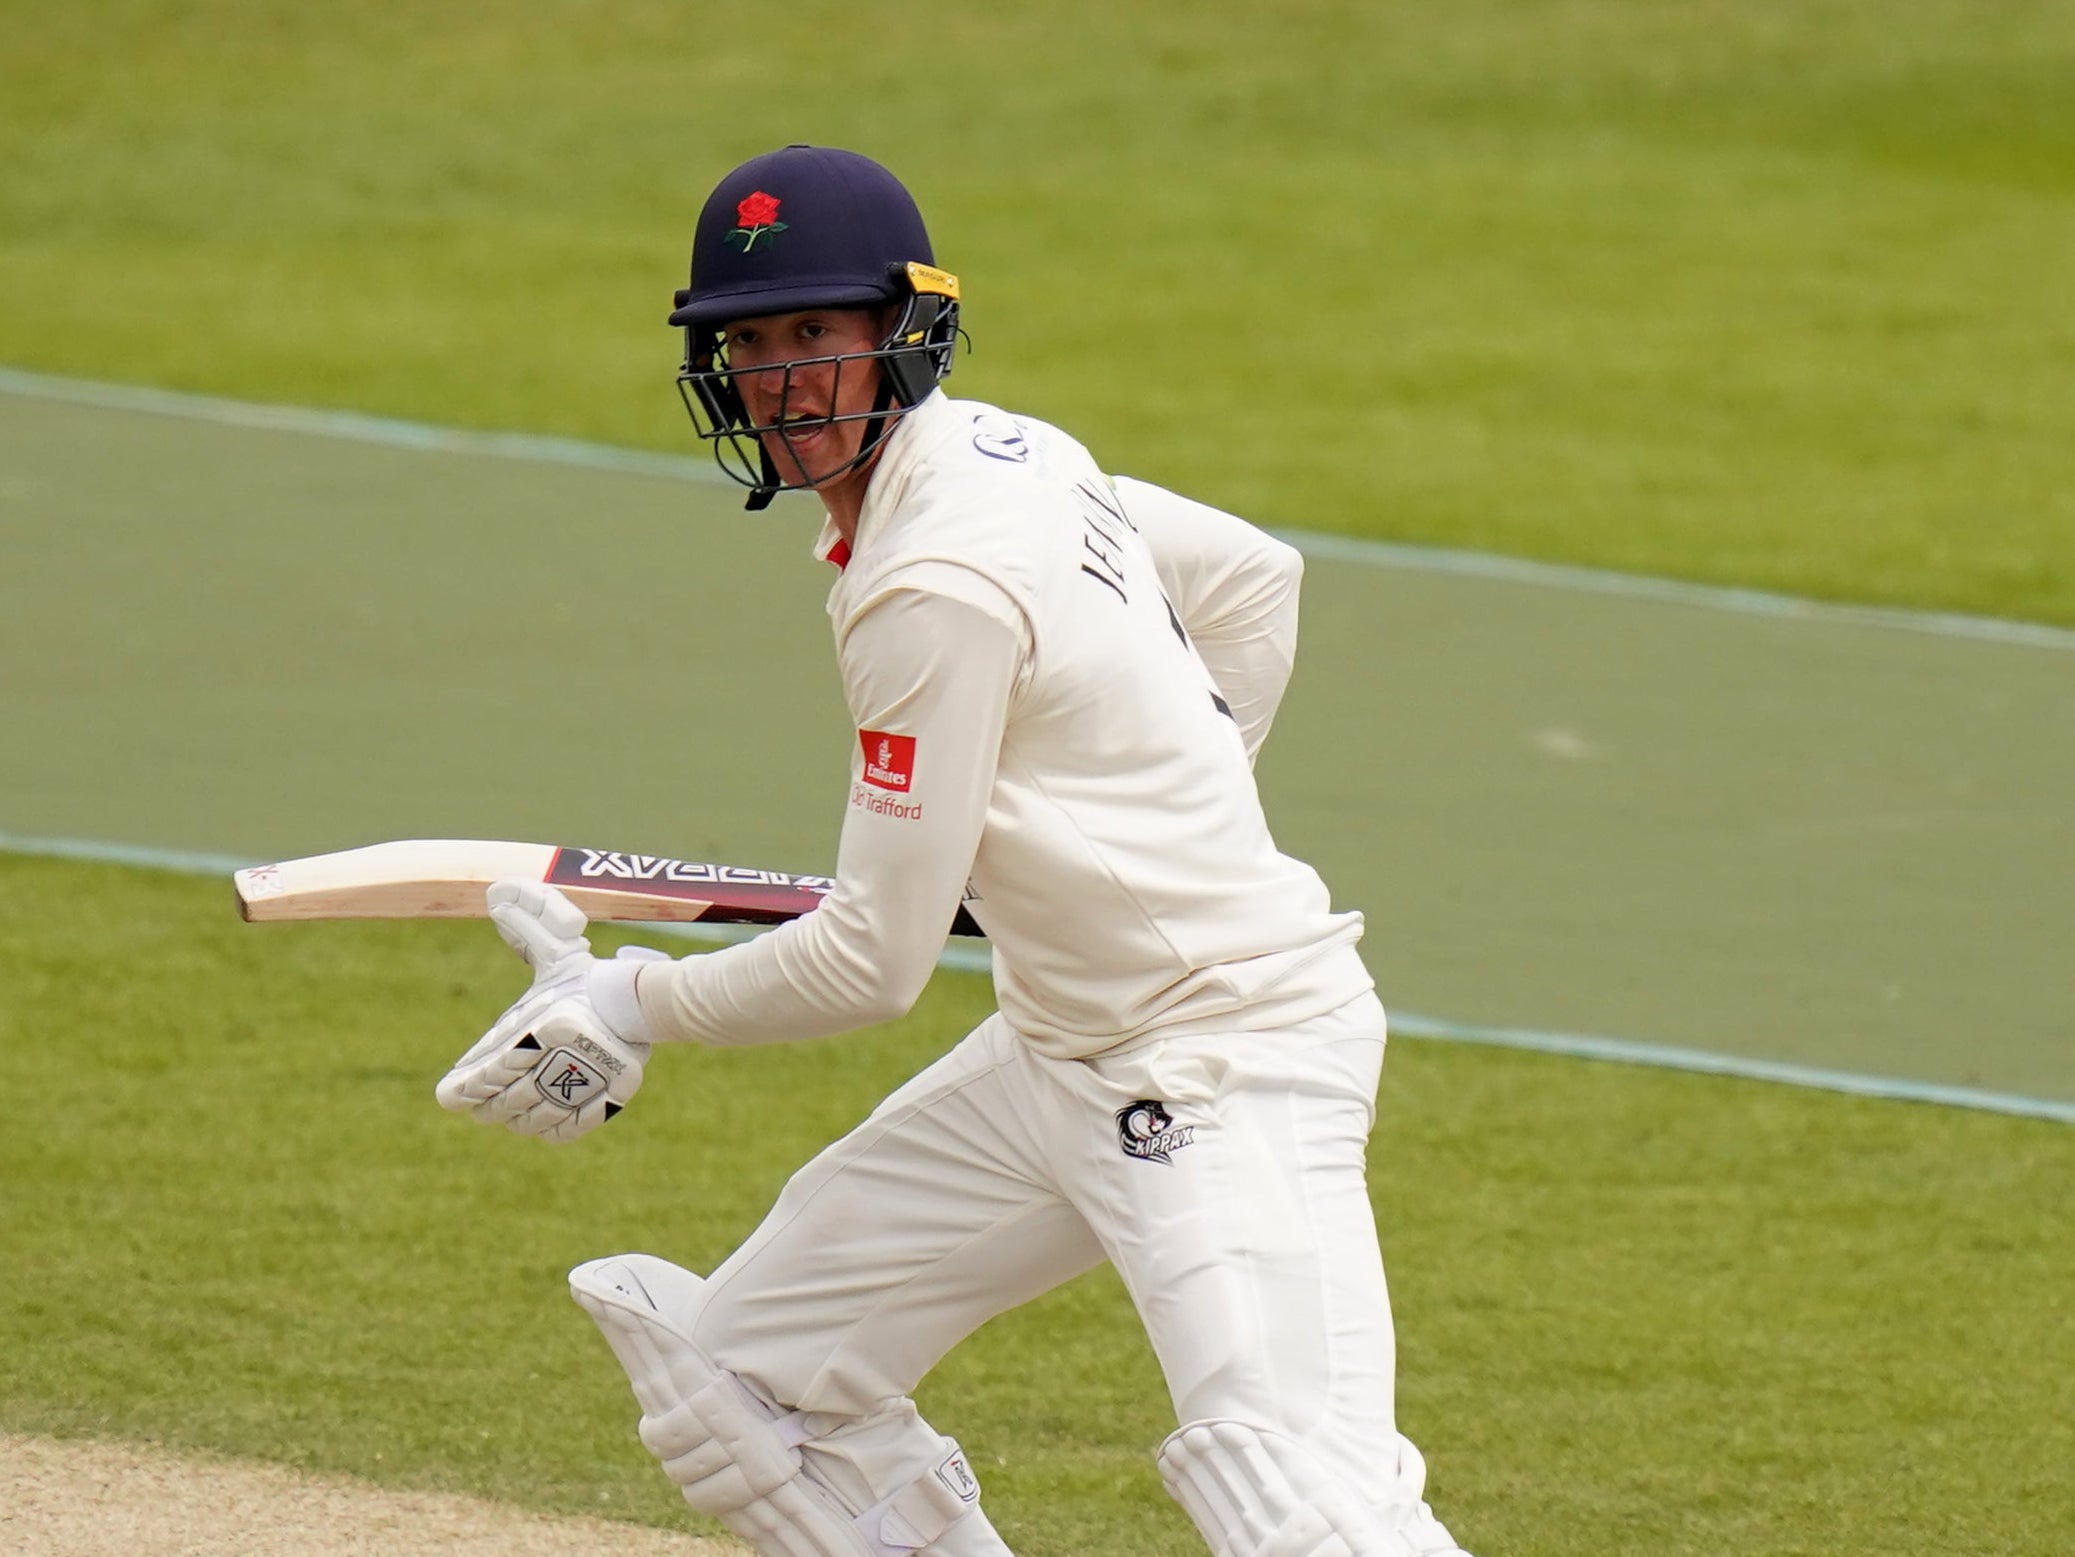 Lancashire’s Keaton Jennings scored 132 on day one of the Roses clash with Yorkshire at Emerald Headingley (Adam Davy/PA).